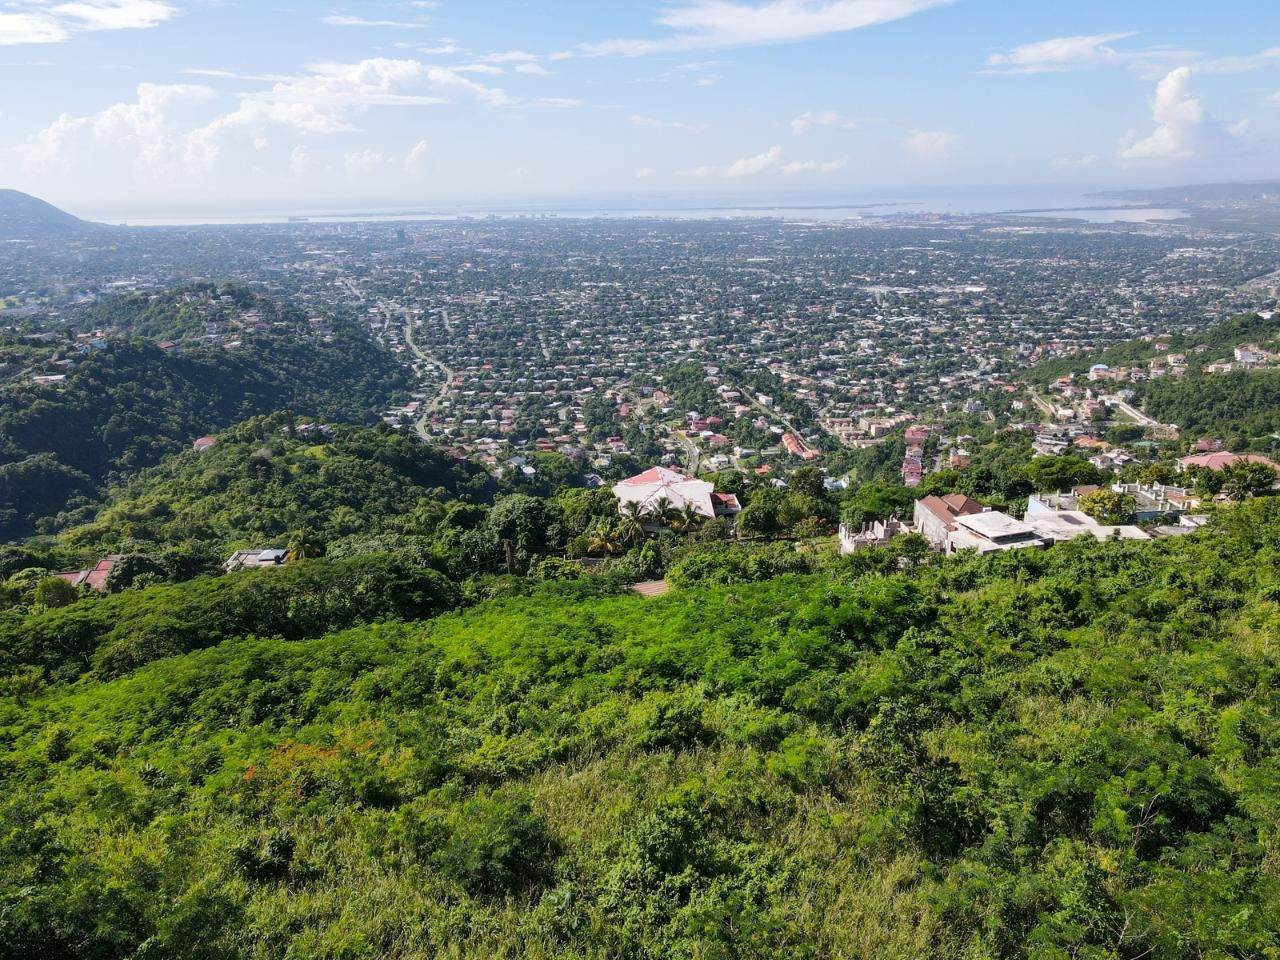 8. Lots / Acreage for Sale at Kingston 8, Kingston and Saint Andrew, Jamaica